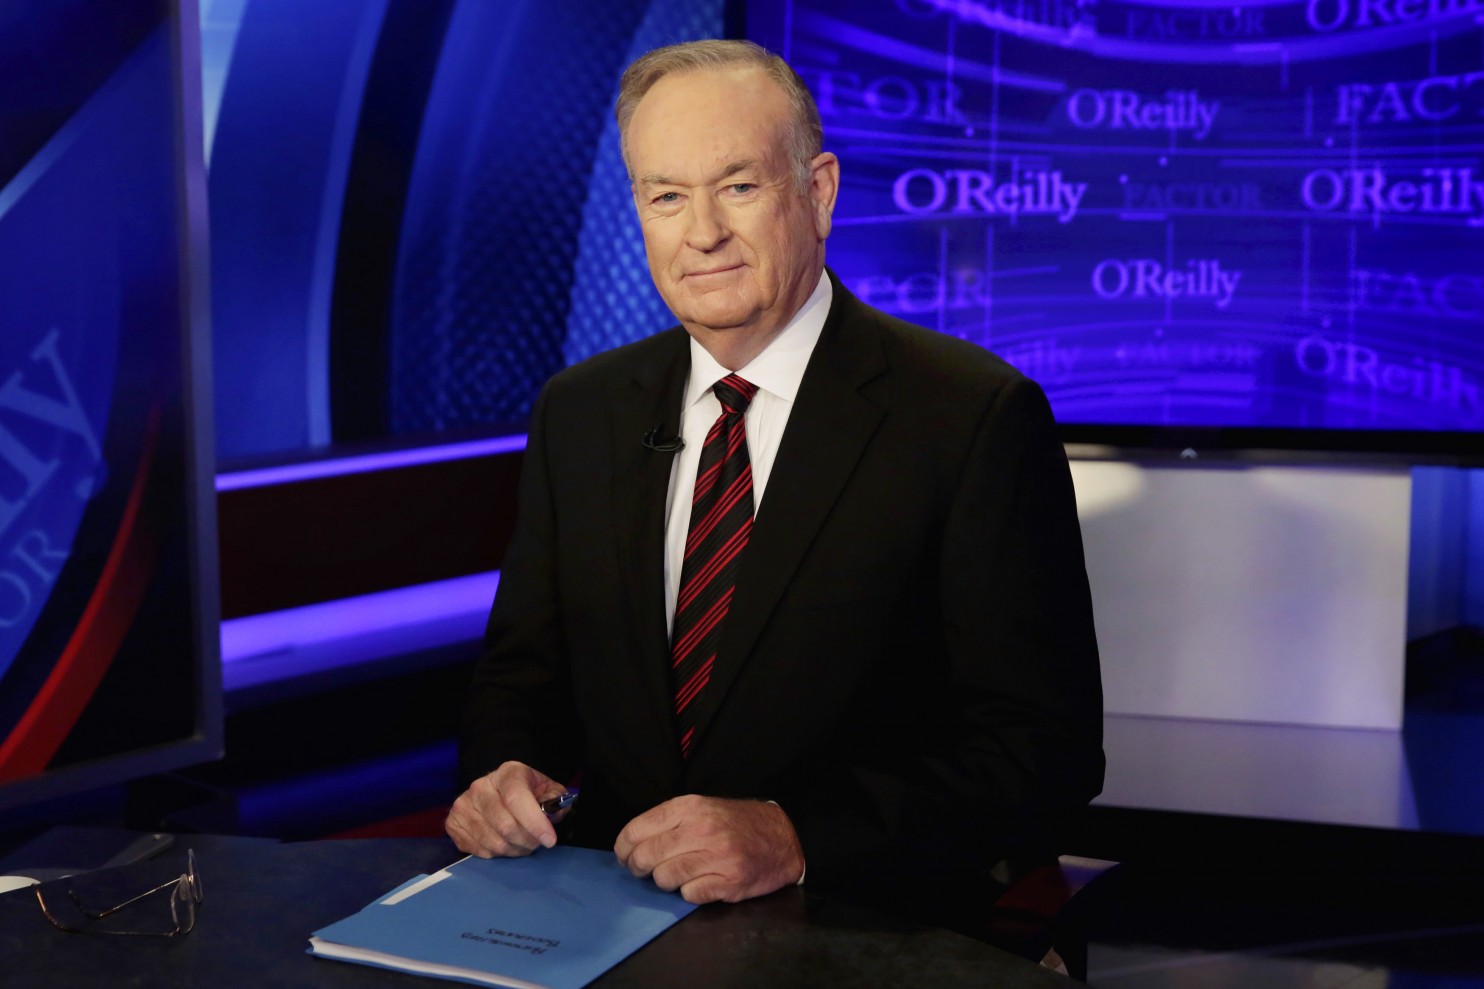 Advertisers are Fleeing Bill O’Reilly, but Viewers Aren’t